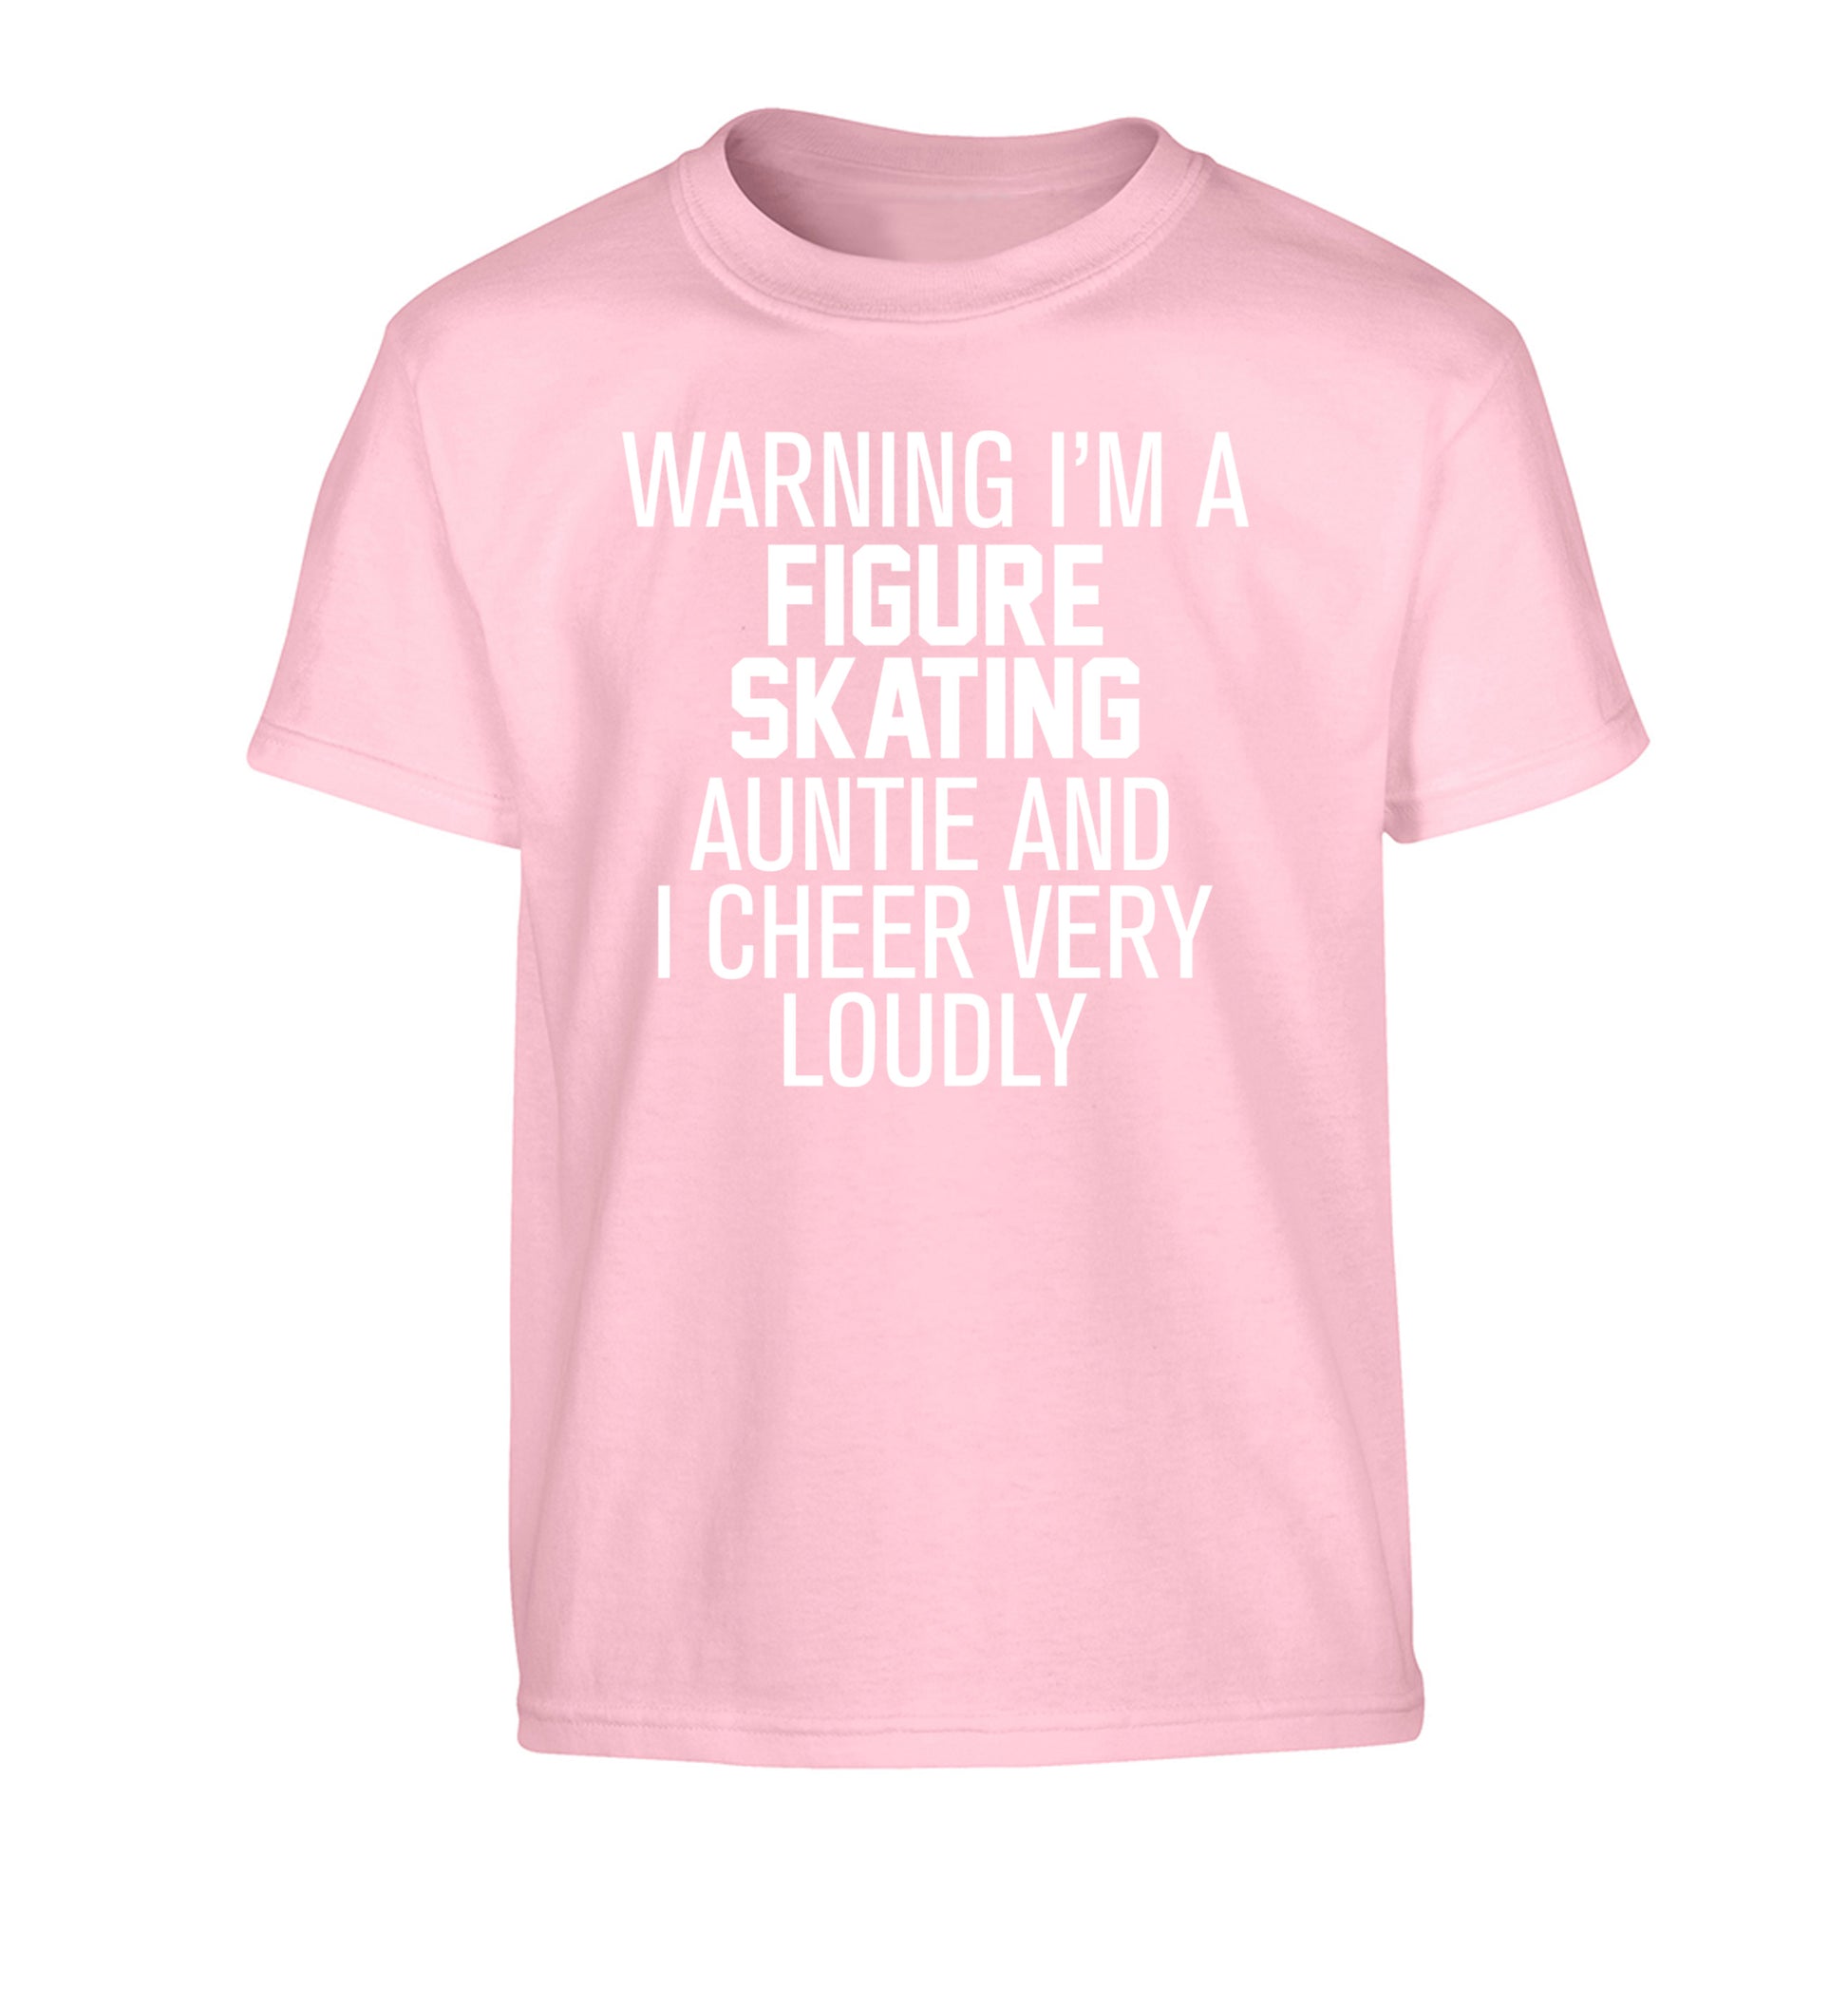 Warning I'm a figure skating auntie and I cheer very loudly Children's light pink Tshirt 12-14 Years